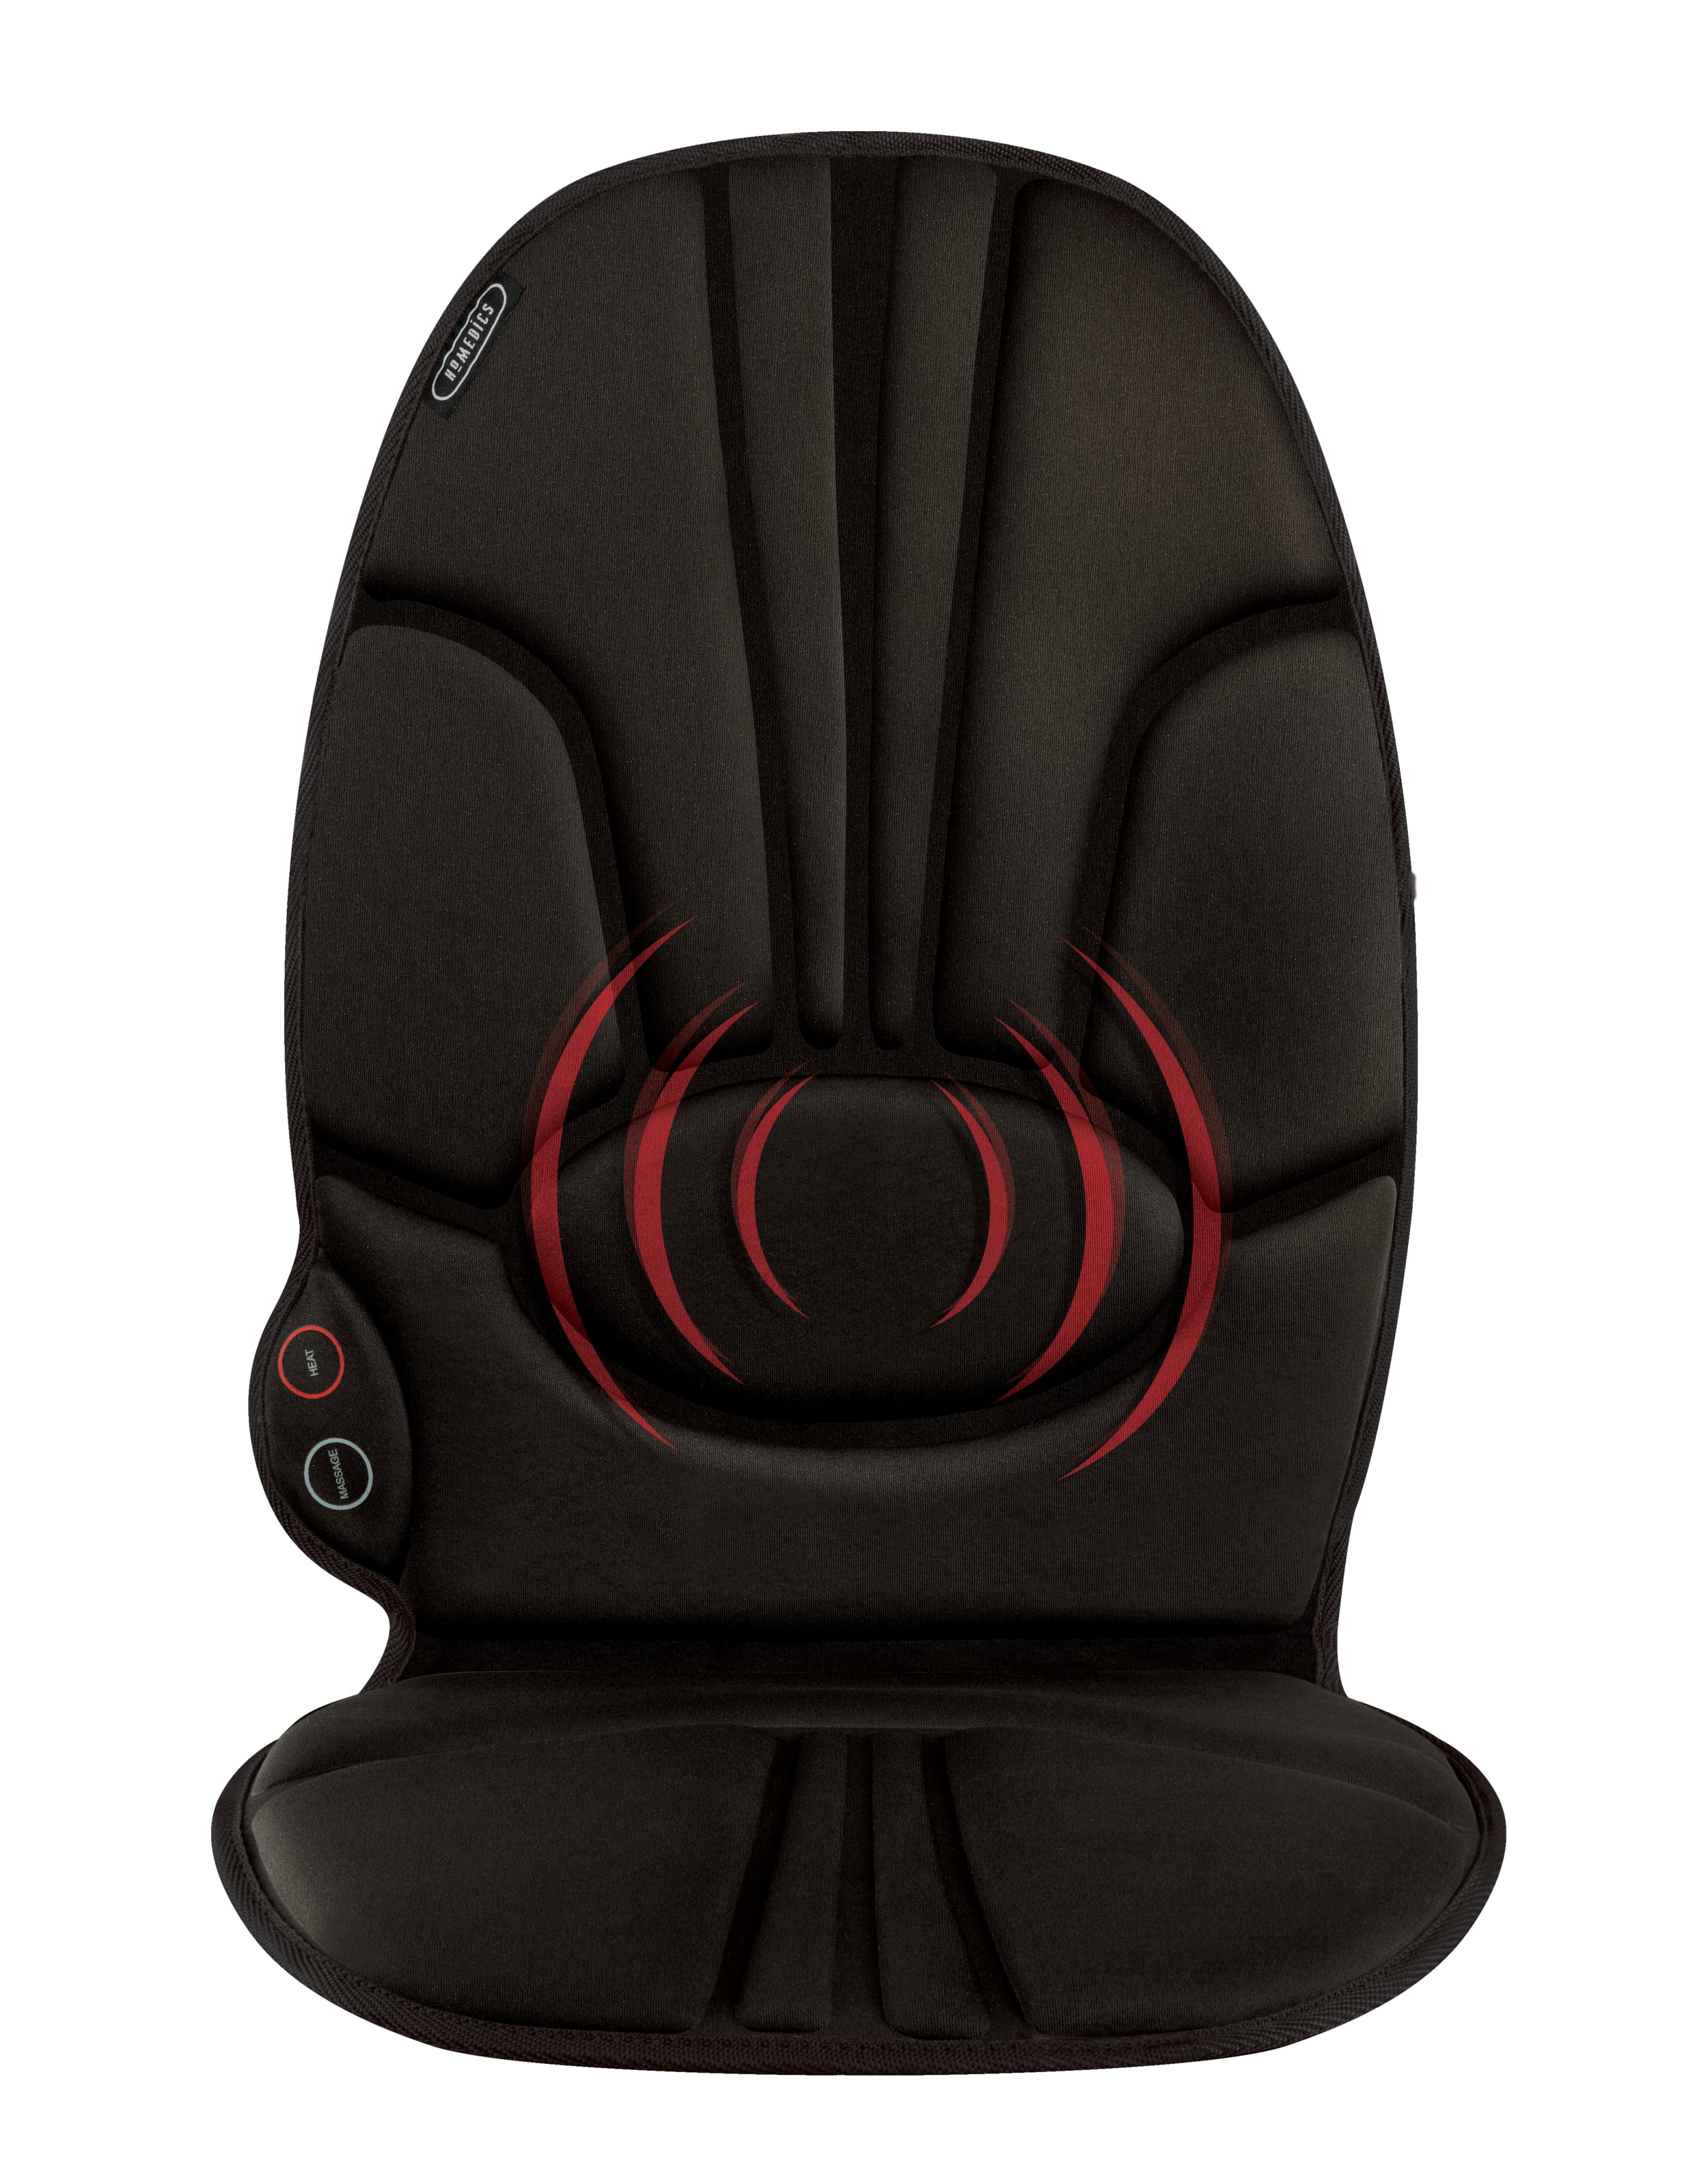 HoMedics Portable Back Massage Cushion with Heat, Color: Multi - JCPenney